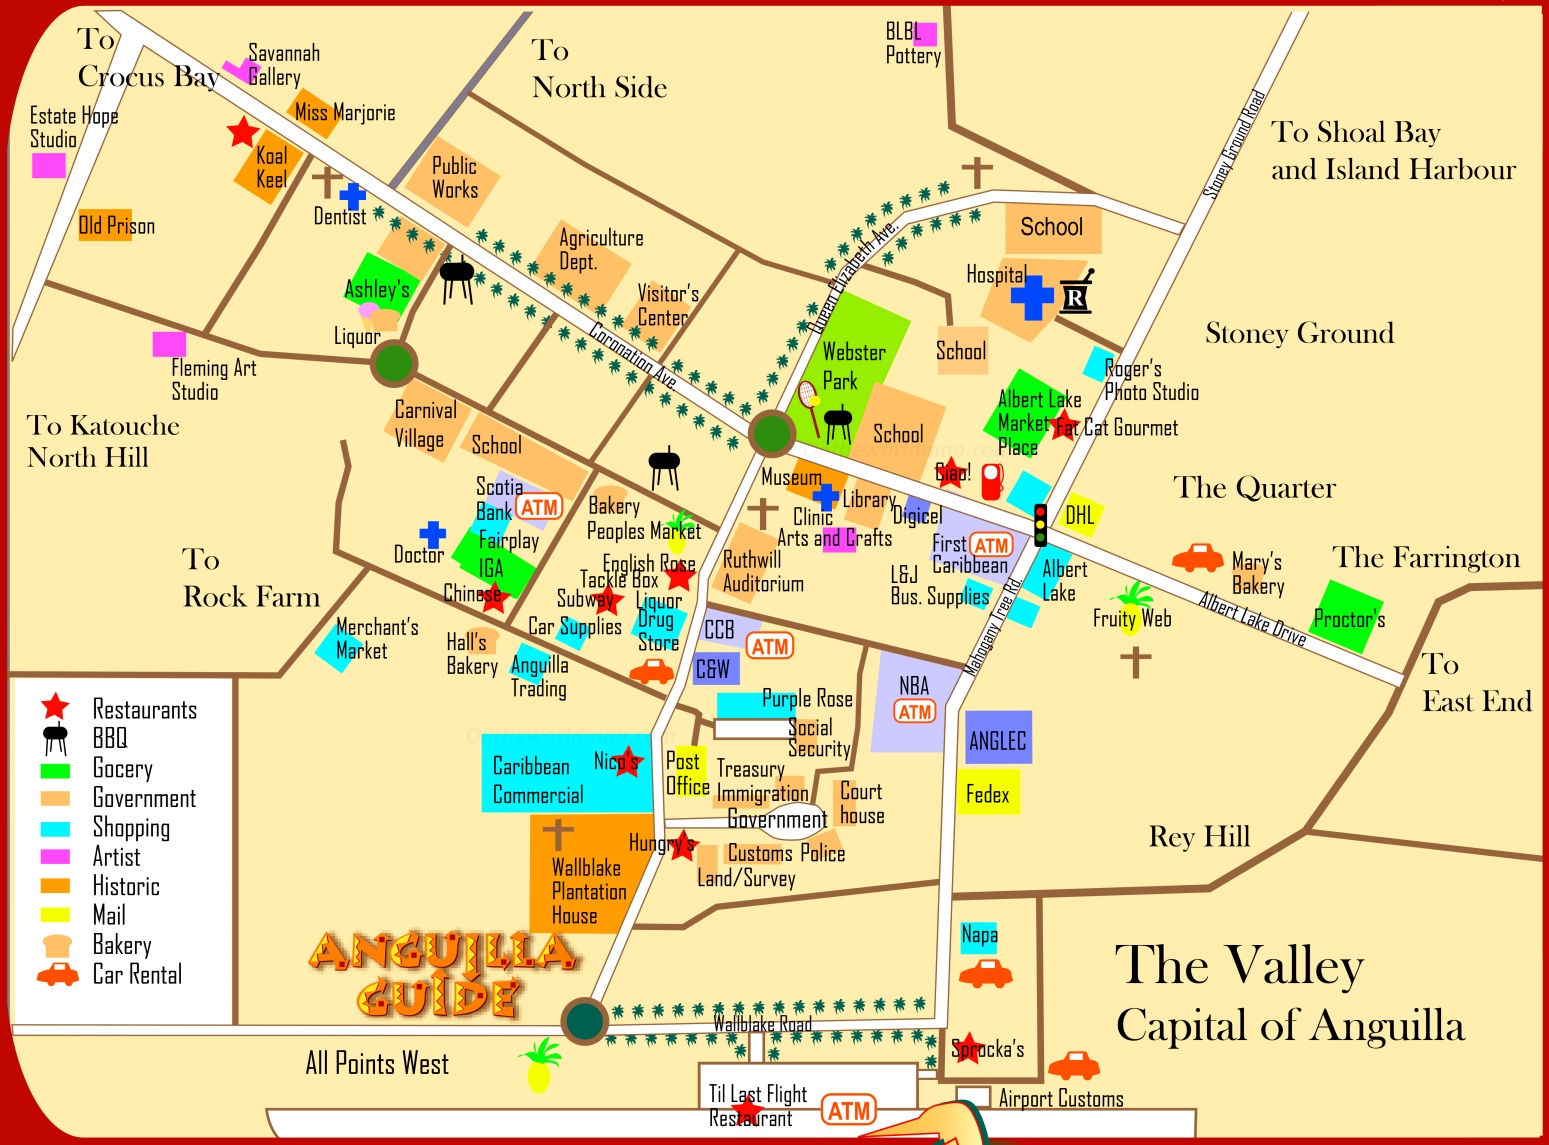 The Valley Tourist Map